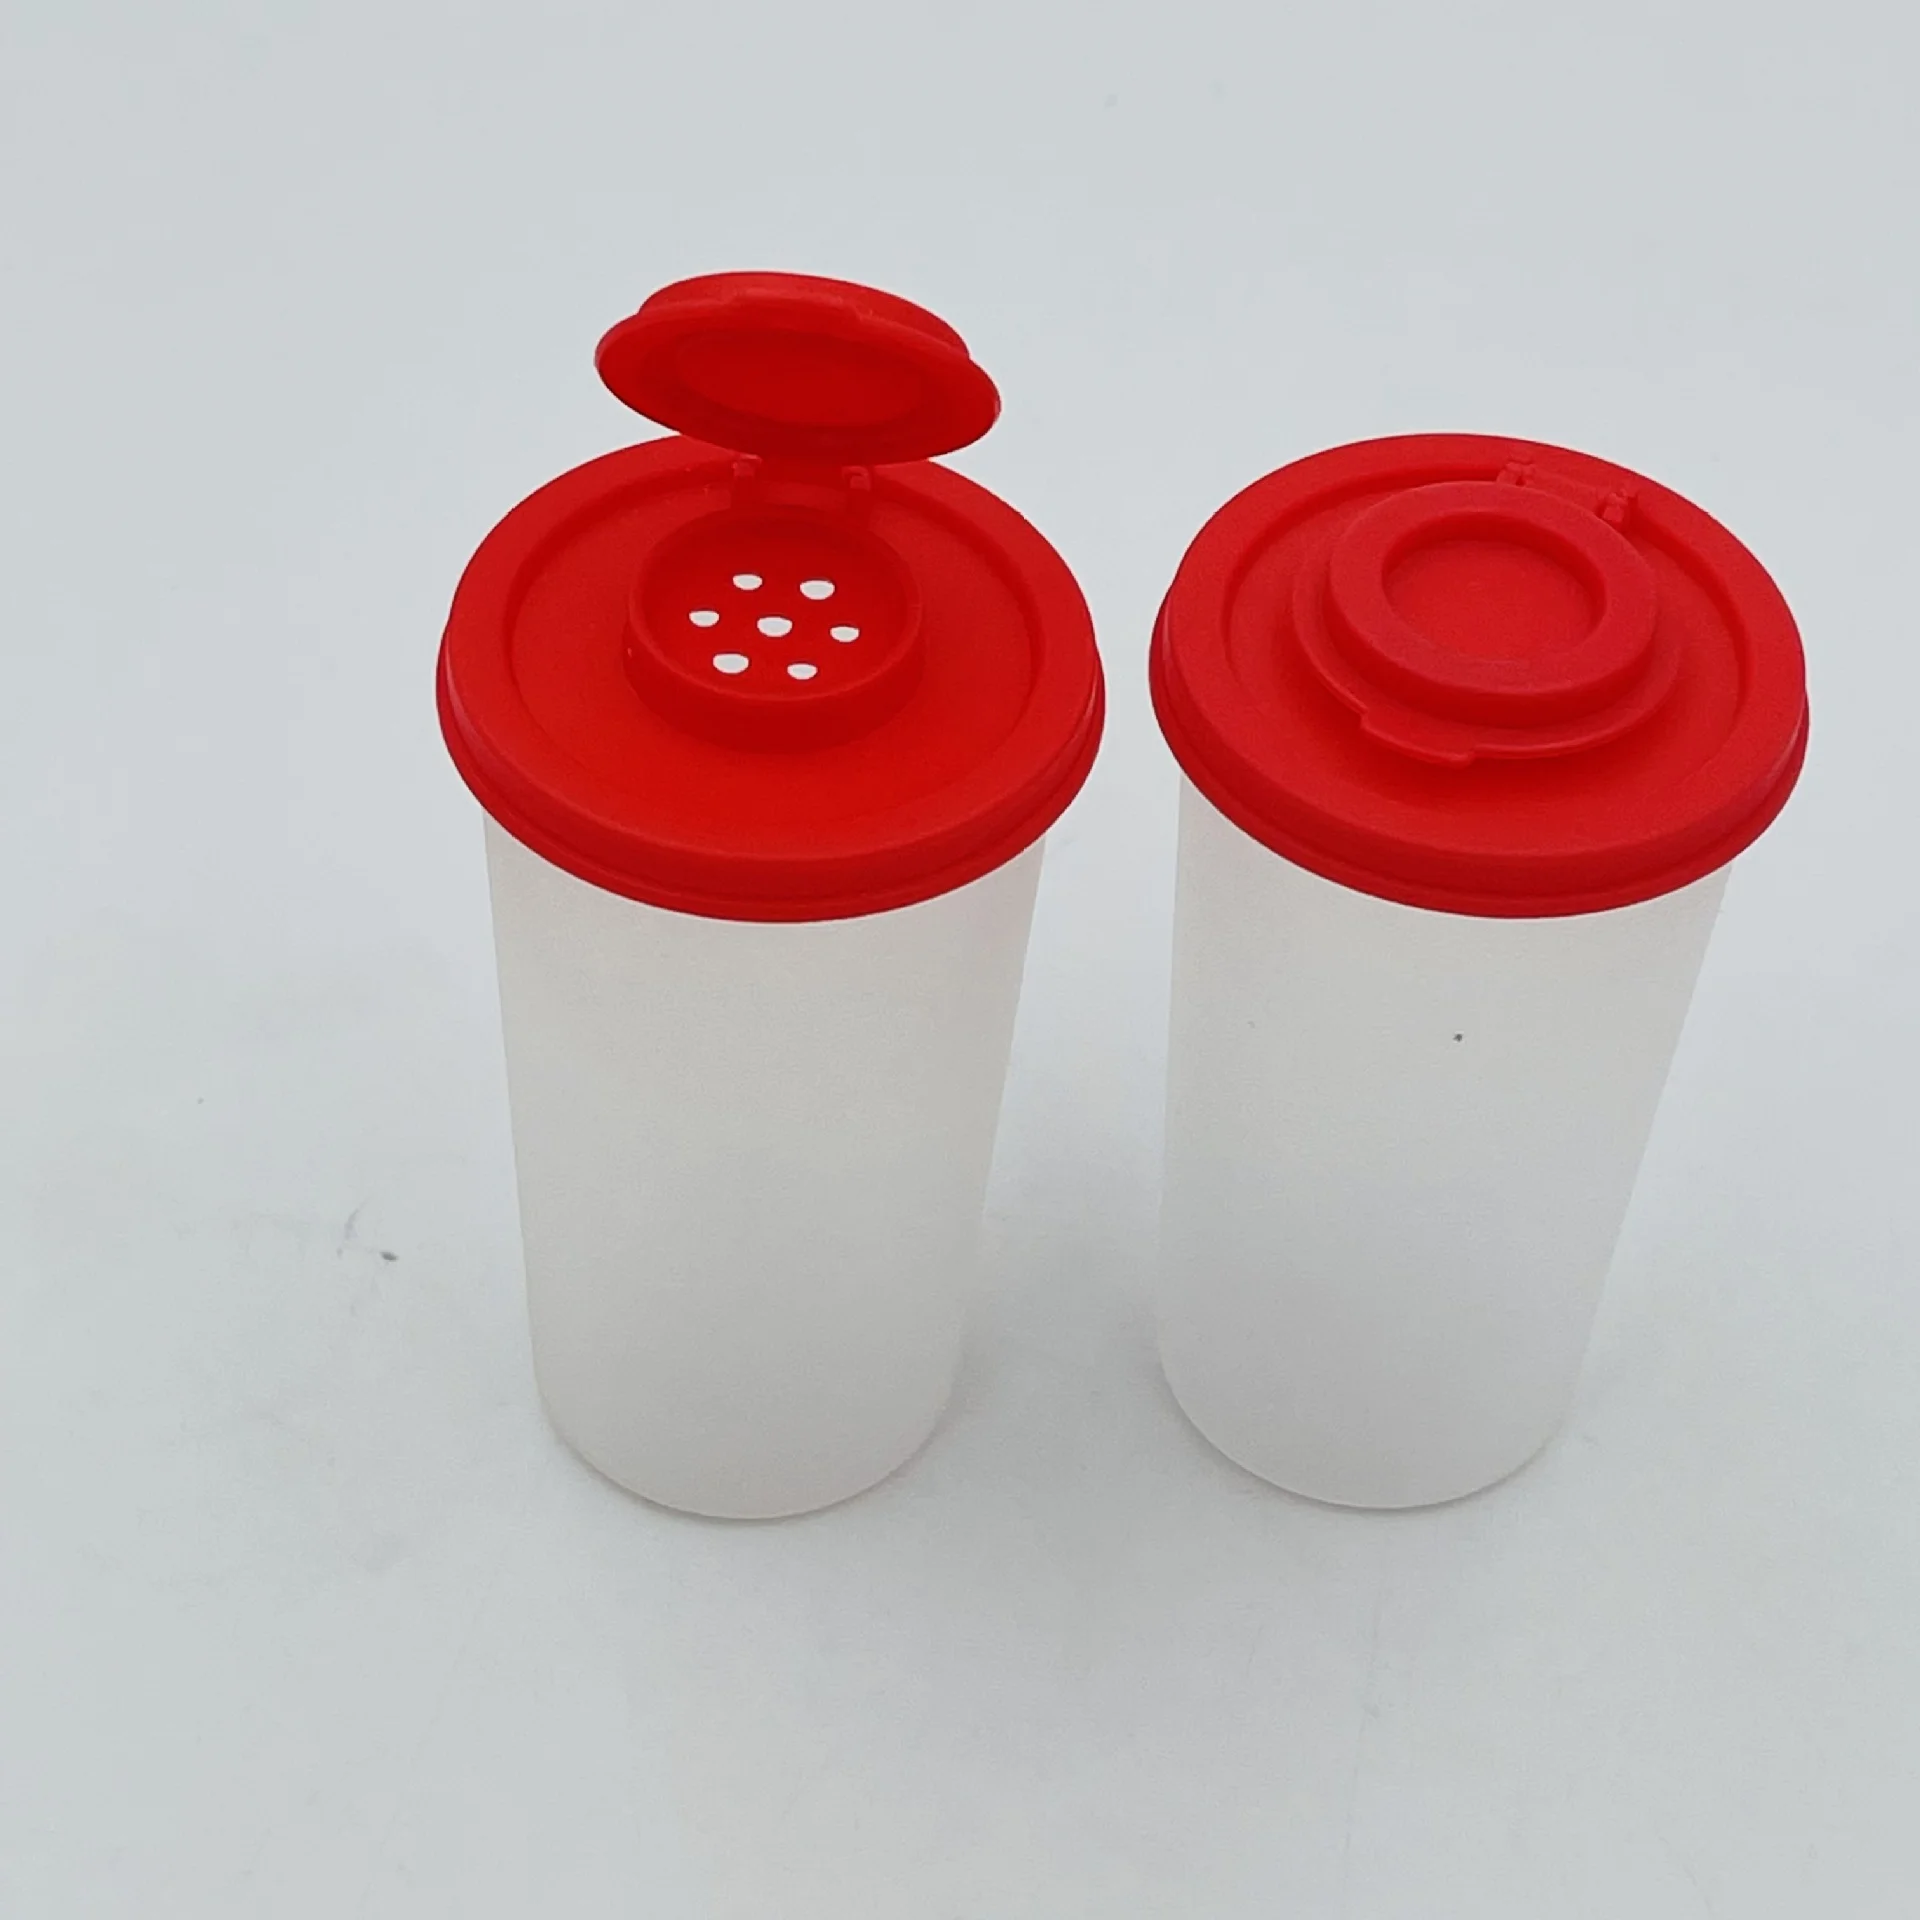 New Tupperware 20 oz.large shaker with red lid